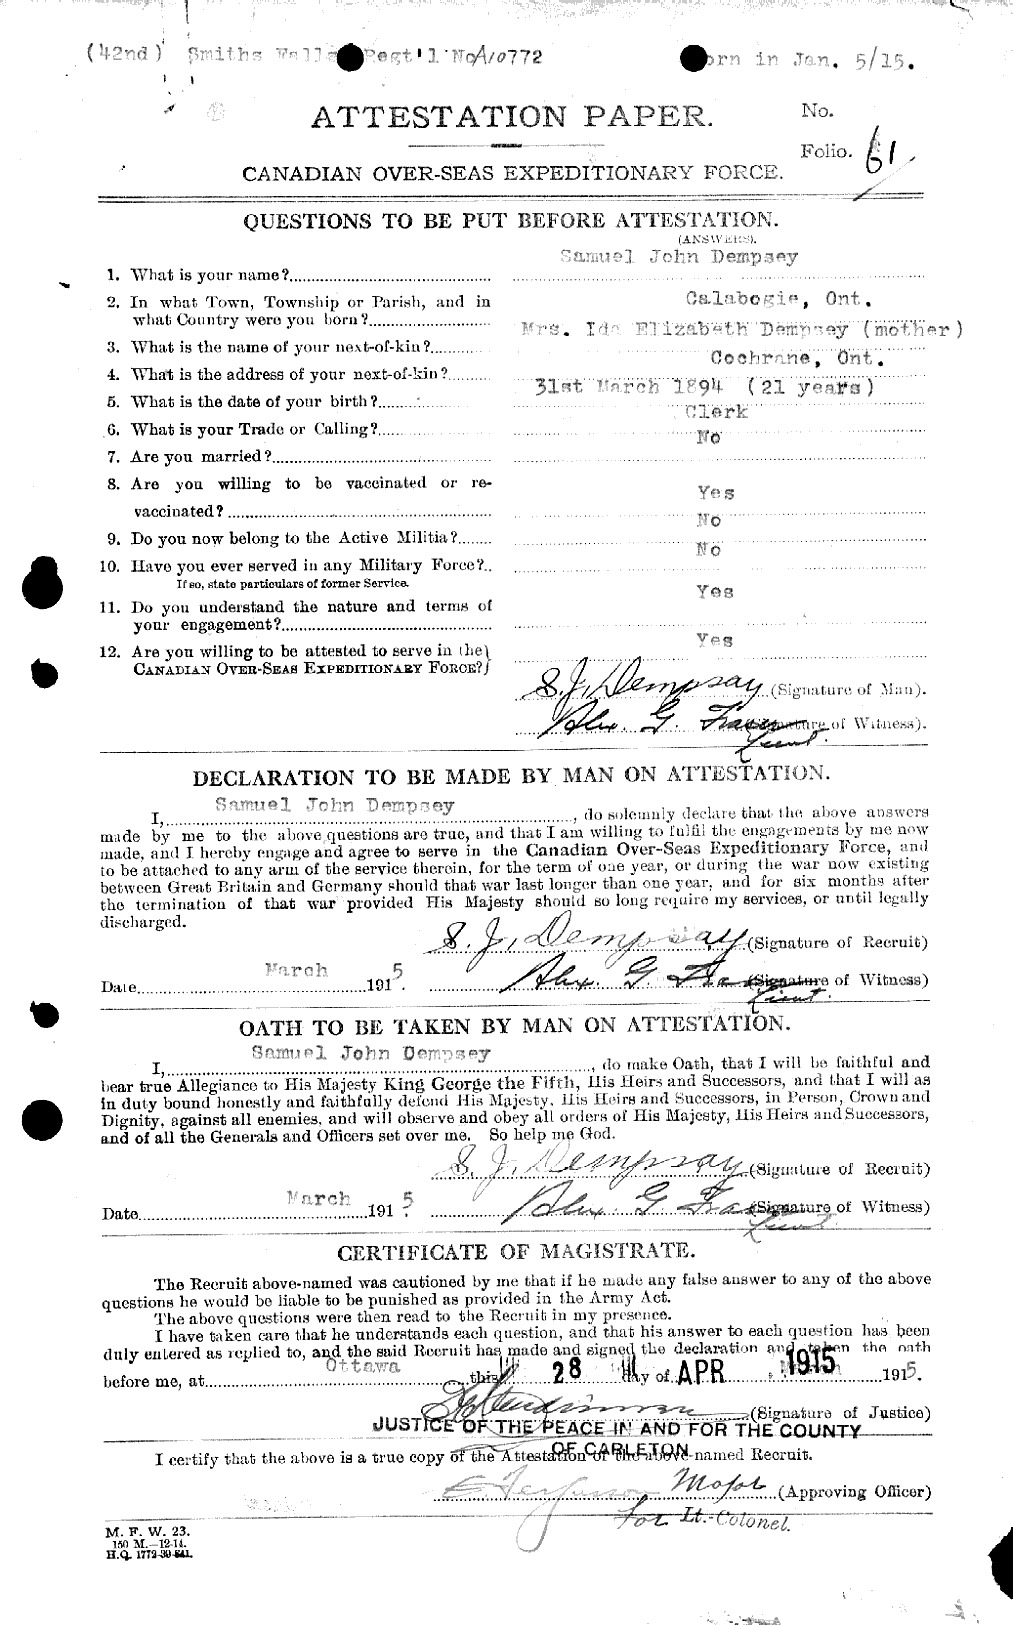 Personnel Records of the First World War - CEF 051286a